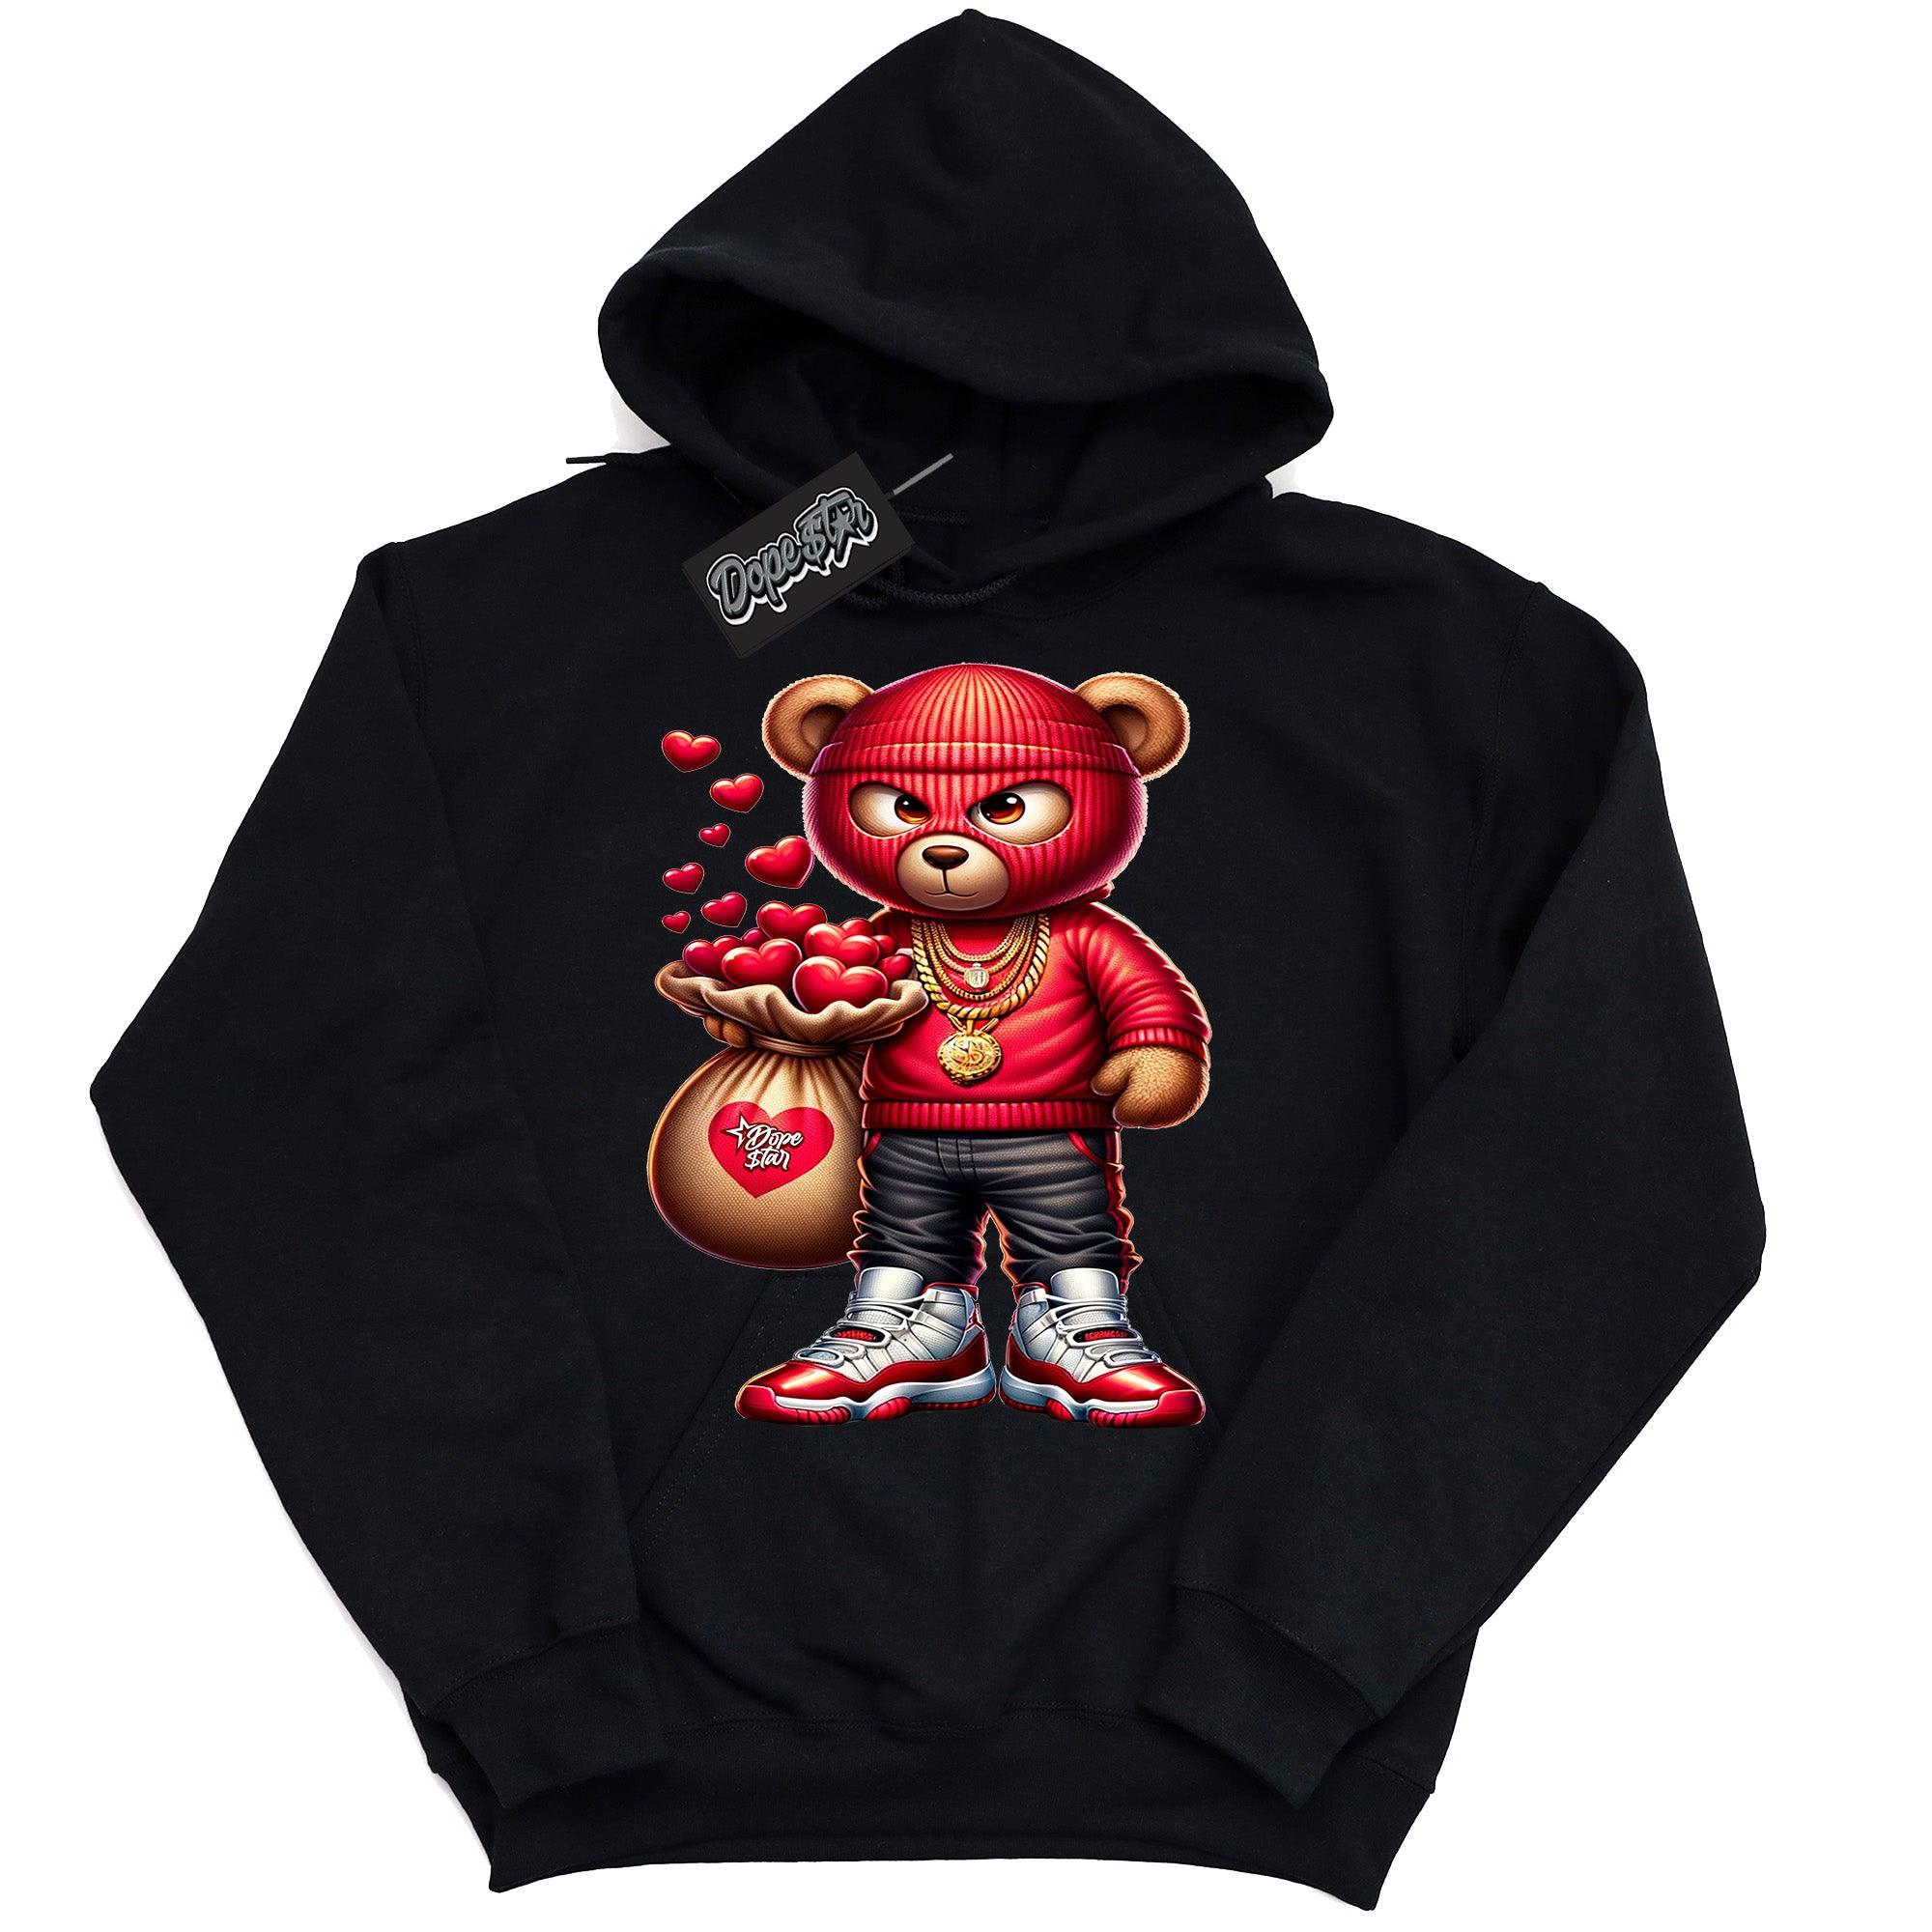 Cool Black Graphic Hoodie with “ Valentine Thief “ print, that perfectly matches Air Jordan 11 Cherry sneakers